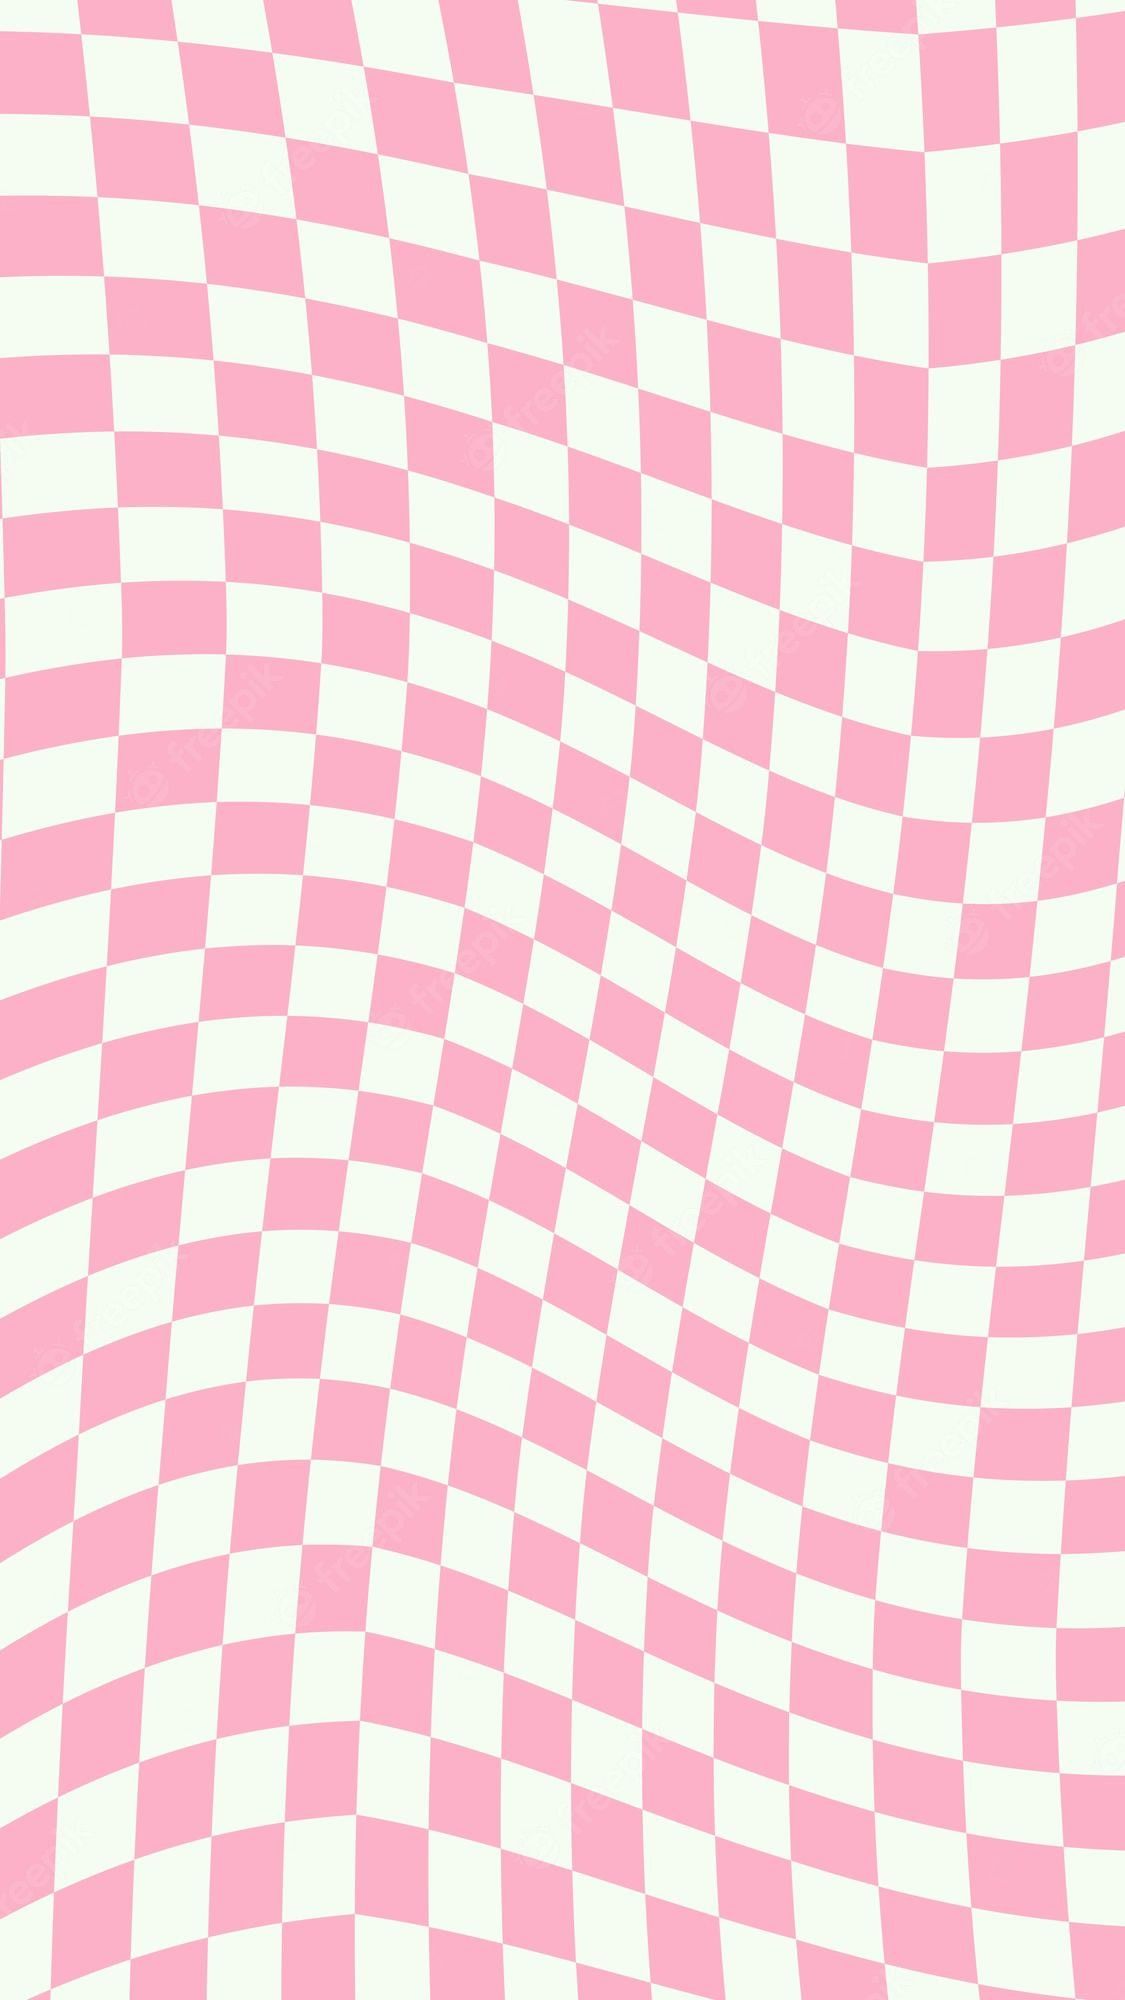 Checkered wallpaper Vectors & Illustrations for Free Download